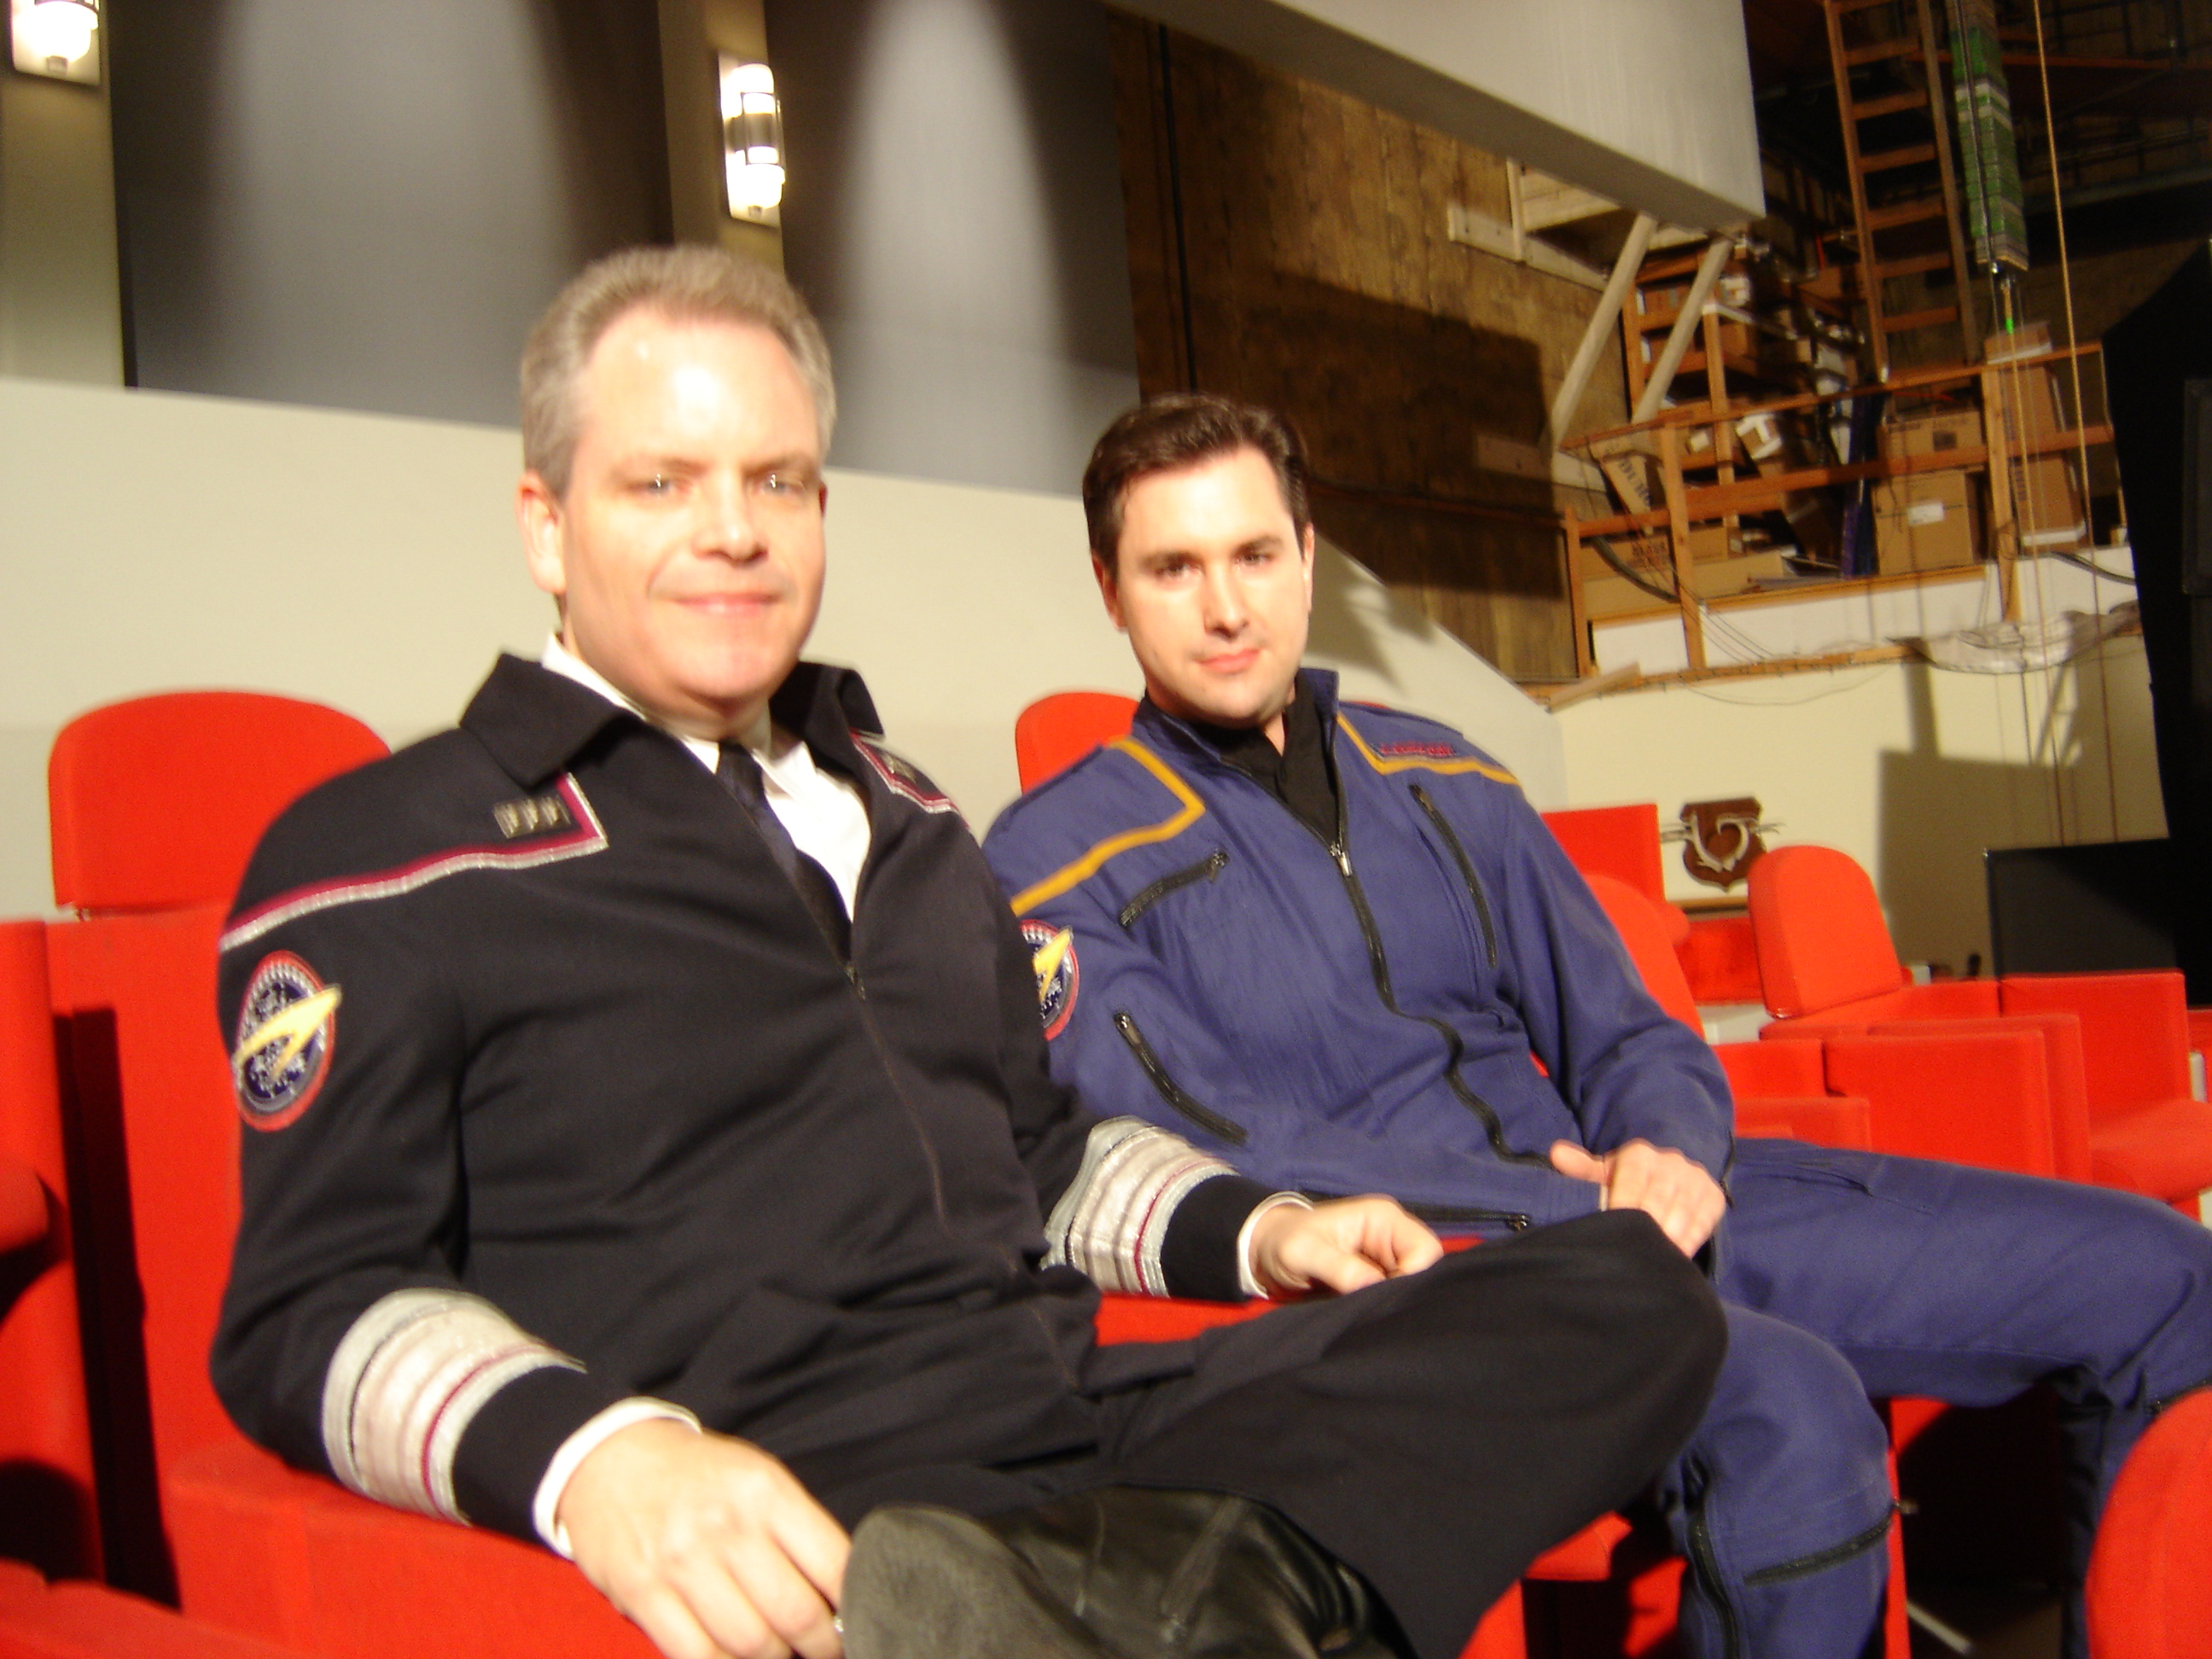 Manny Coto Co-Executive producer, & Evan English relaxing on set during the last episode of the series on Star Trek: Enterprise.